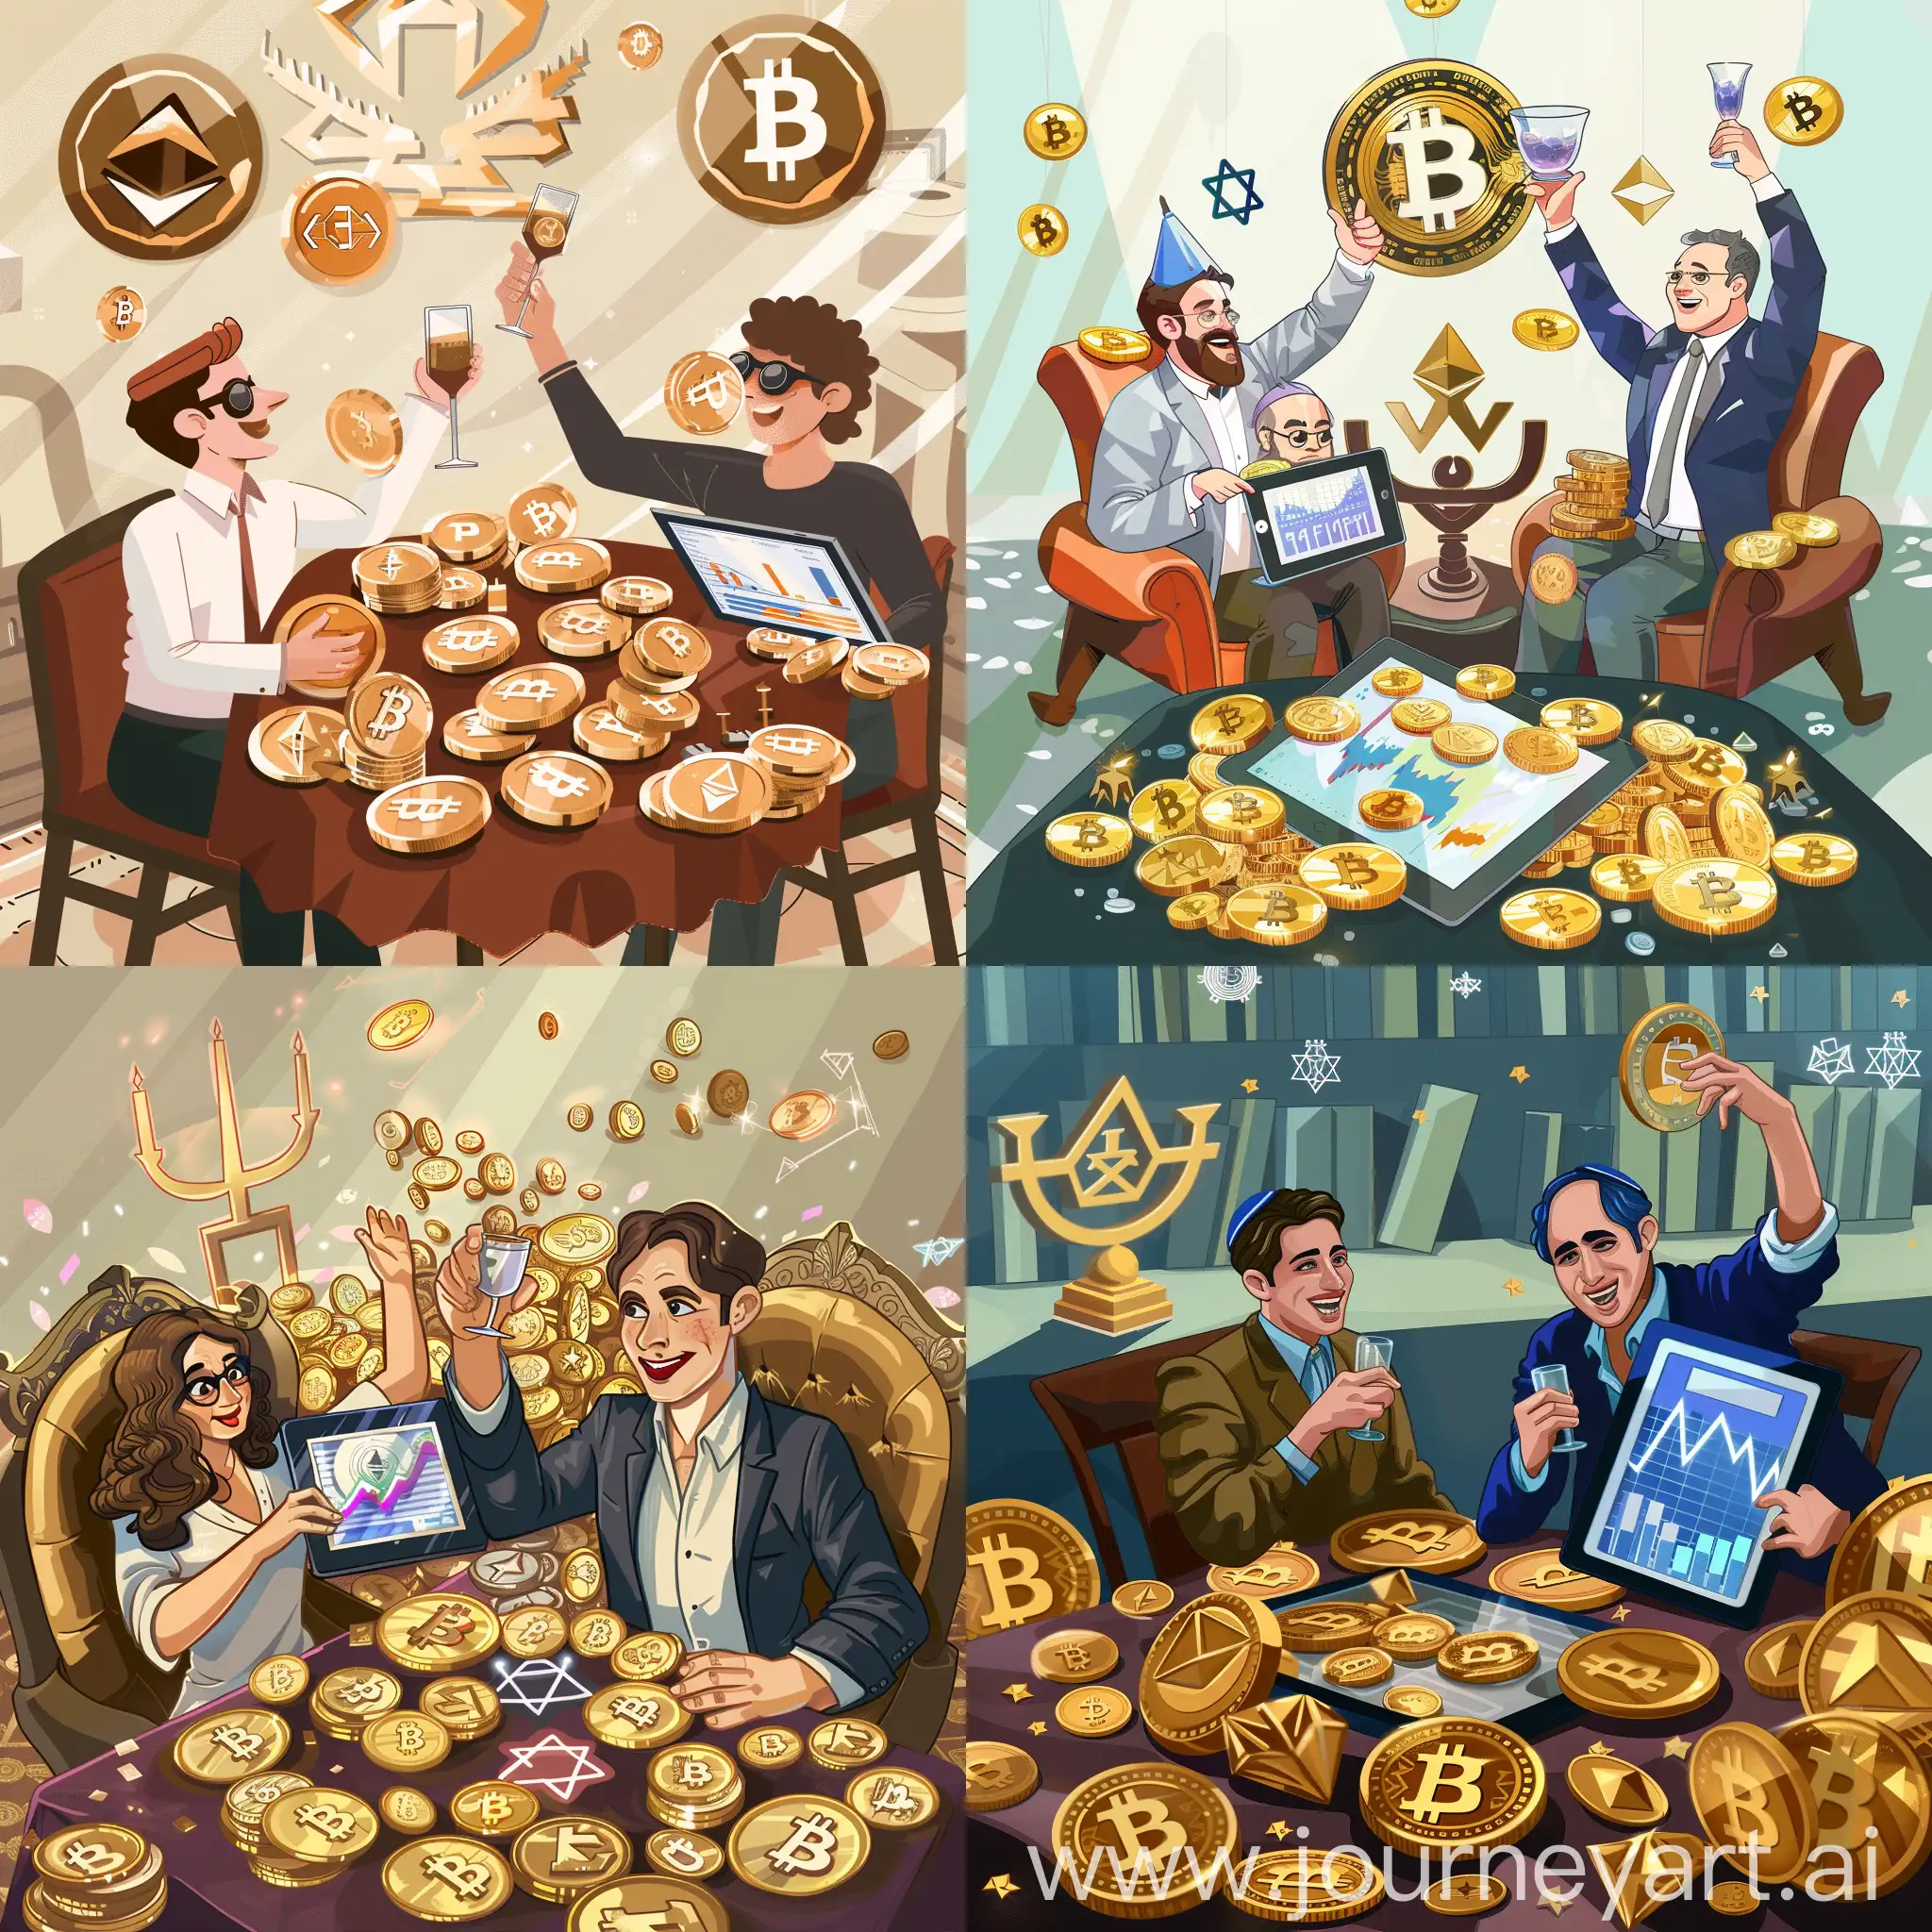 Create an image of two 40-year-old Jewish friends surrounded by large amounts of cryptocurrency. They are seated at a luxurious table, with cryptocurrency coins like Bitcoin and Ethereum spread out in front of them. One friend is holding a tablet showing a rising crypto chart, while the other raises a glass in celebration. Subtle Jewish symbols, such as a menorah or Star of David, should be included in the background.